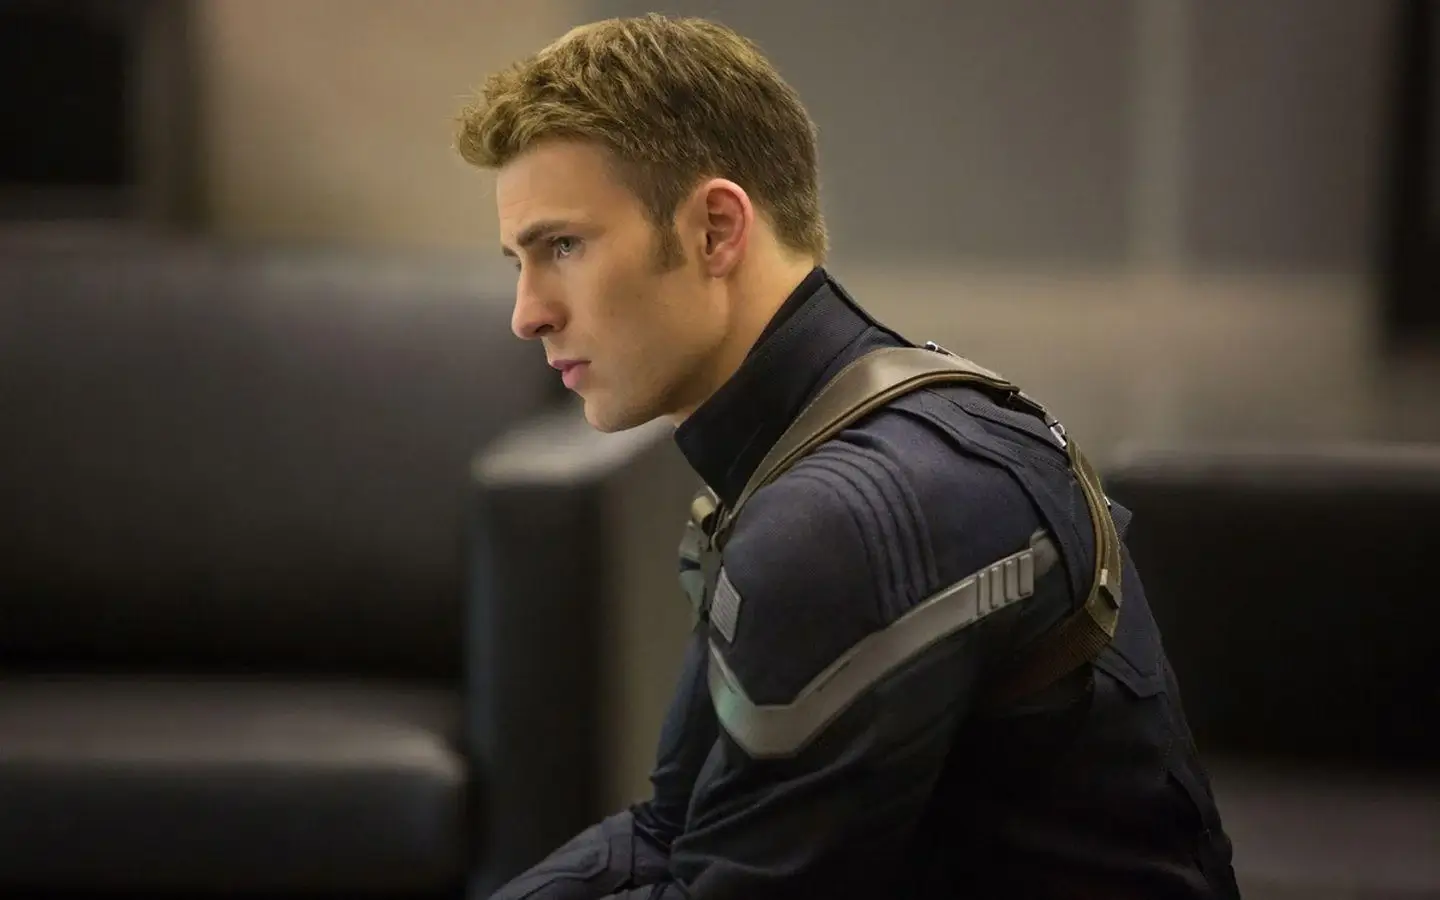 Chris Evans Can Replace Tom Cruise as Ethan Hunt in Mission Impossible Sequels